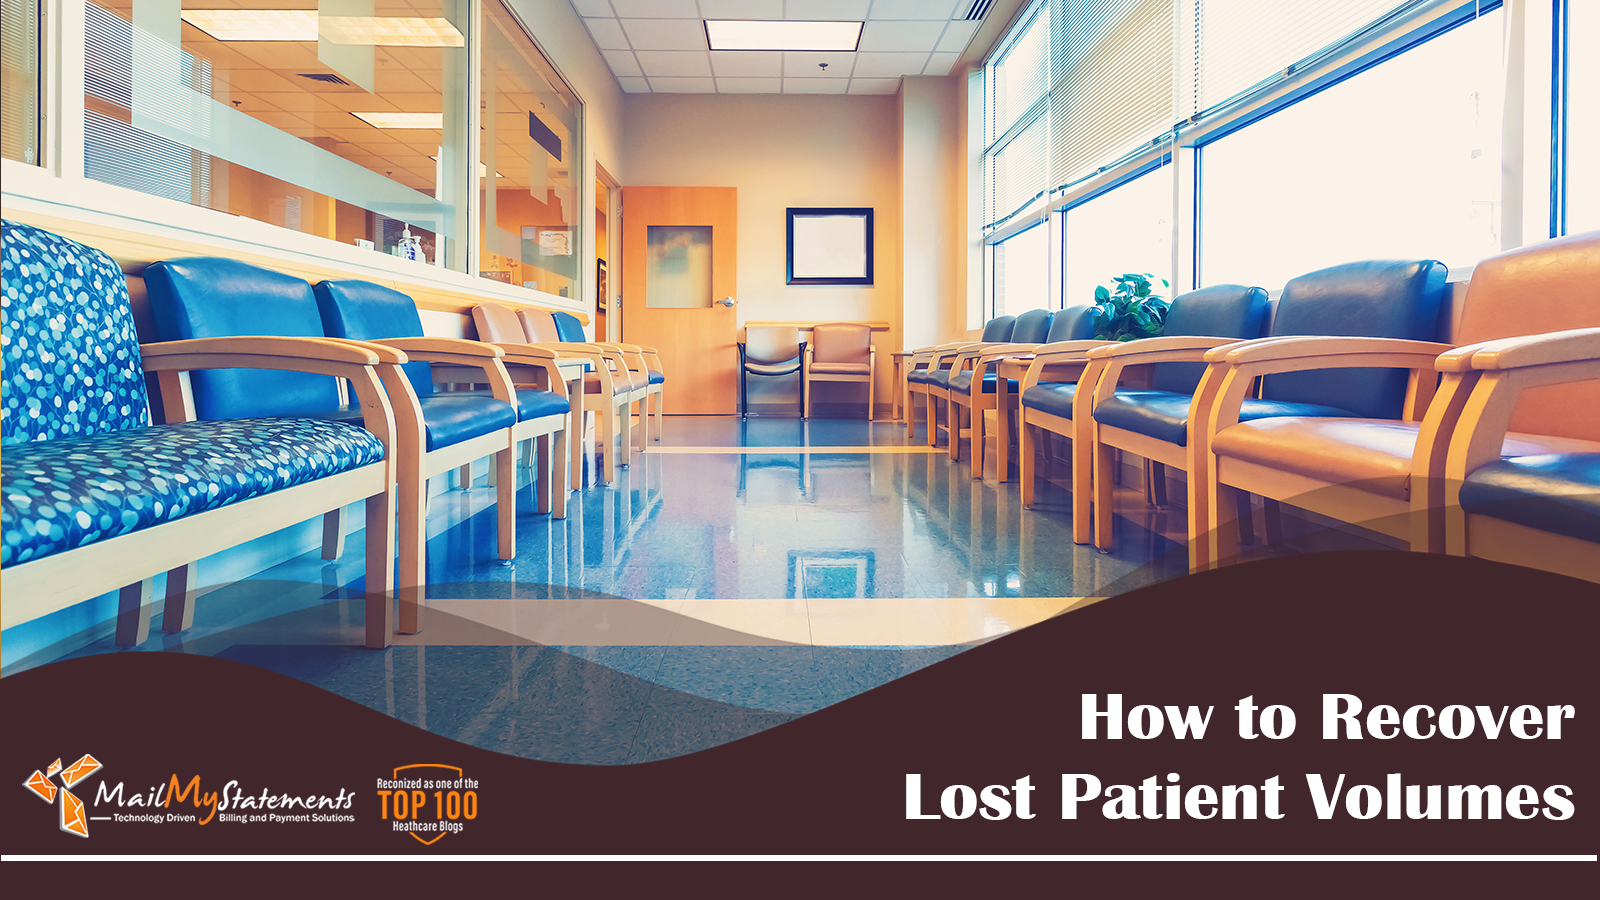 How to Recover Lost Patient Volumes